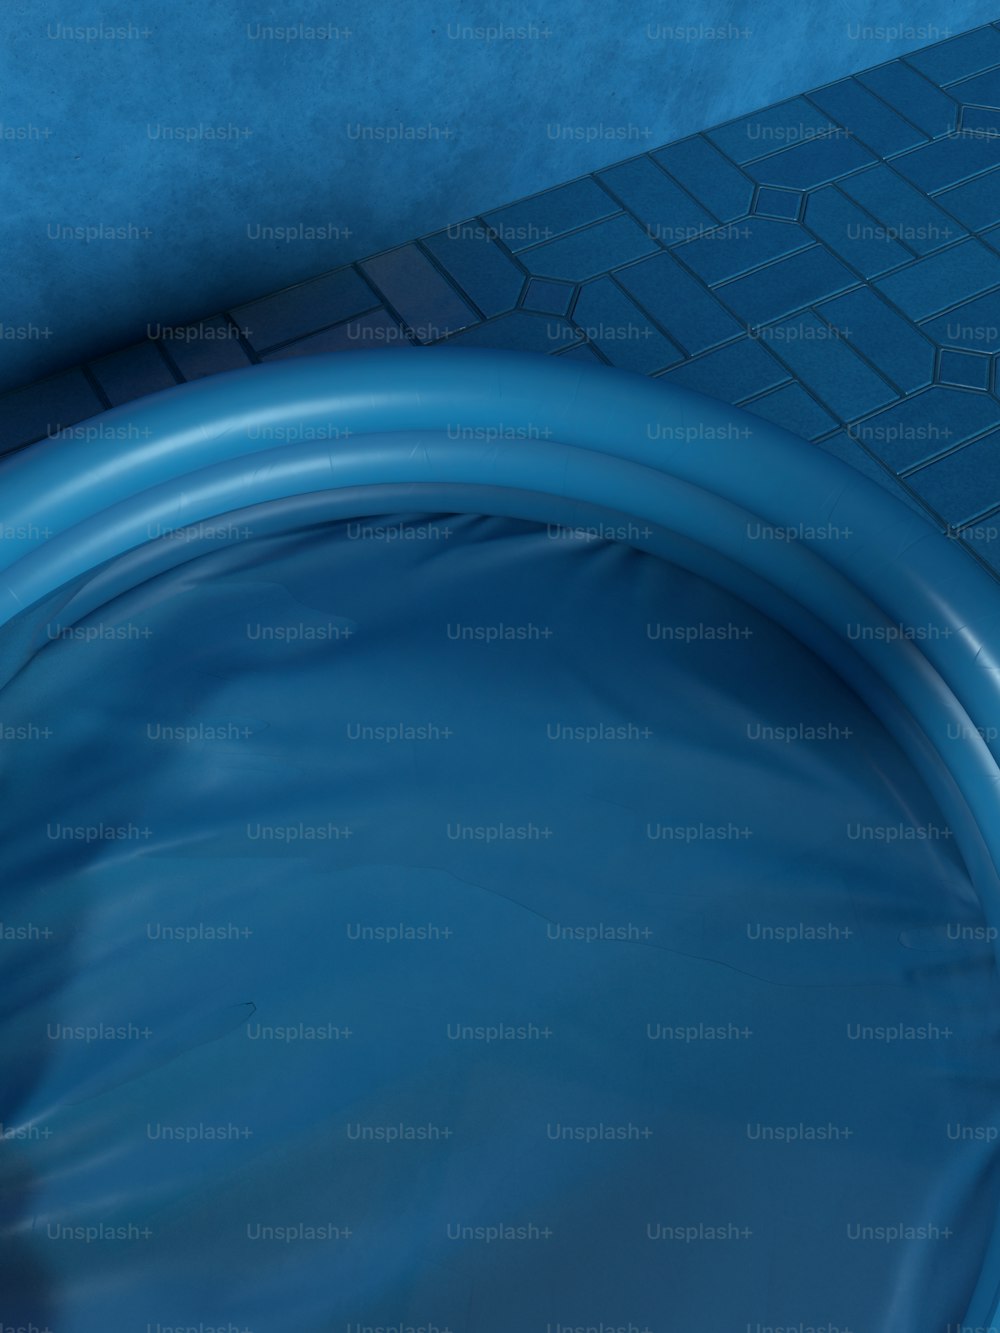 a close up of a blue hose on a tiled floor